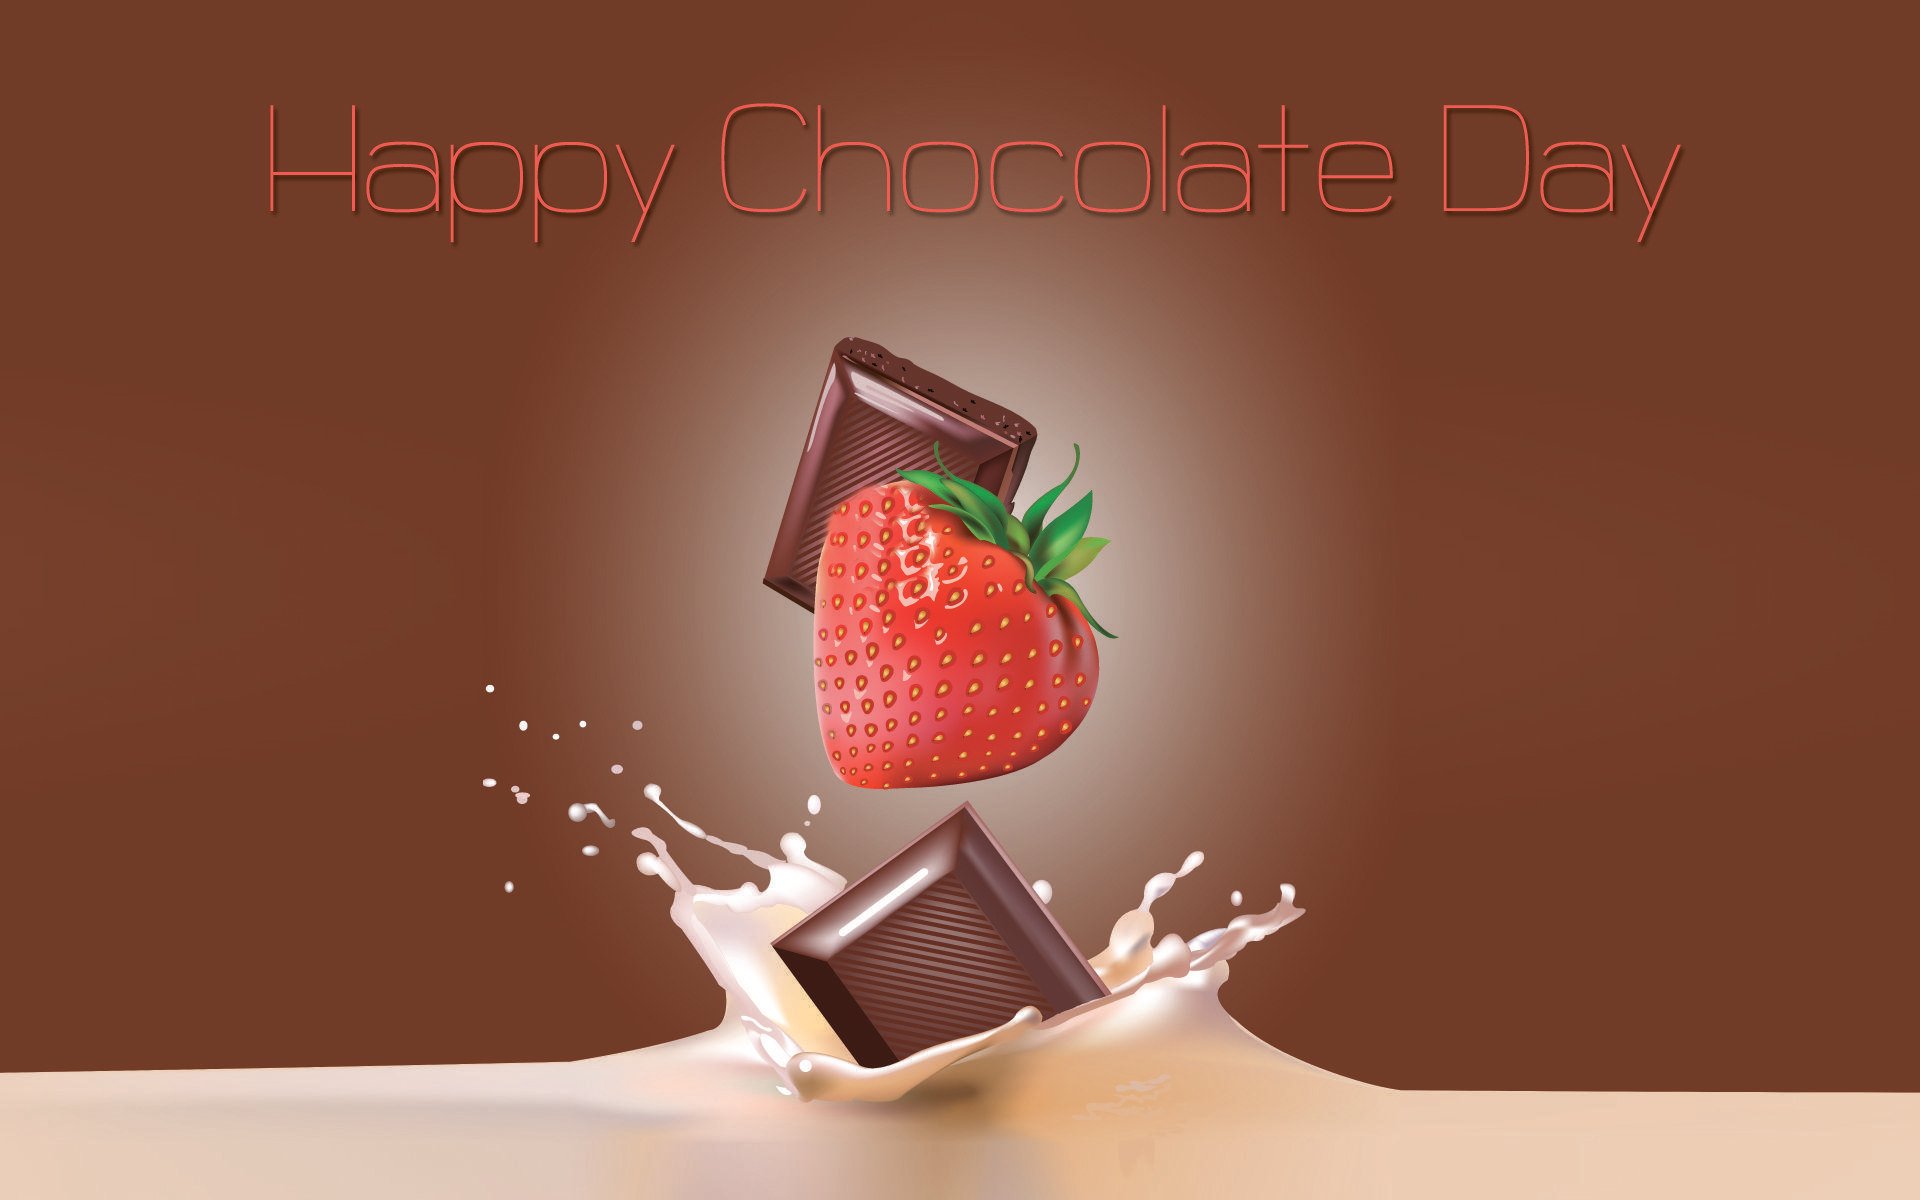 Happy Chocolate Day Quotes. Status For Facebook WhatsApp Instagram